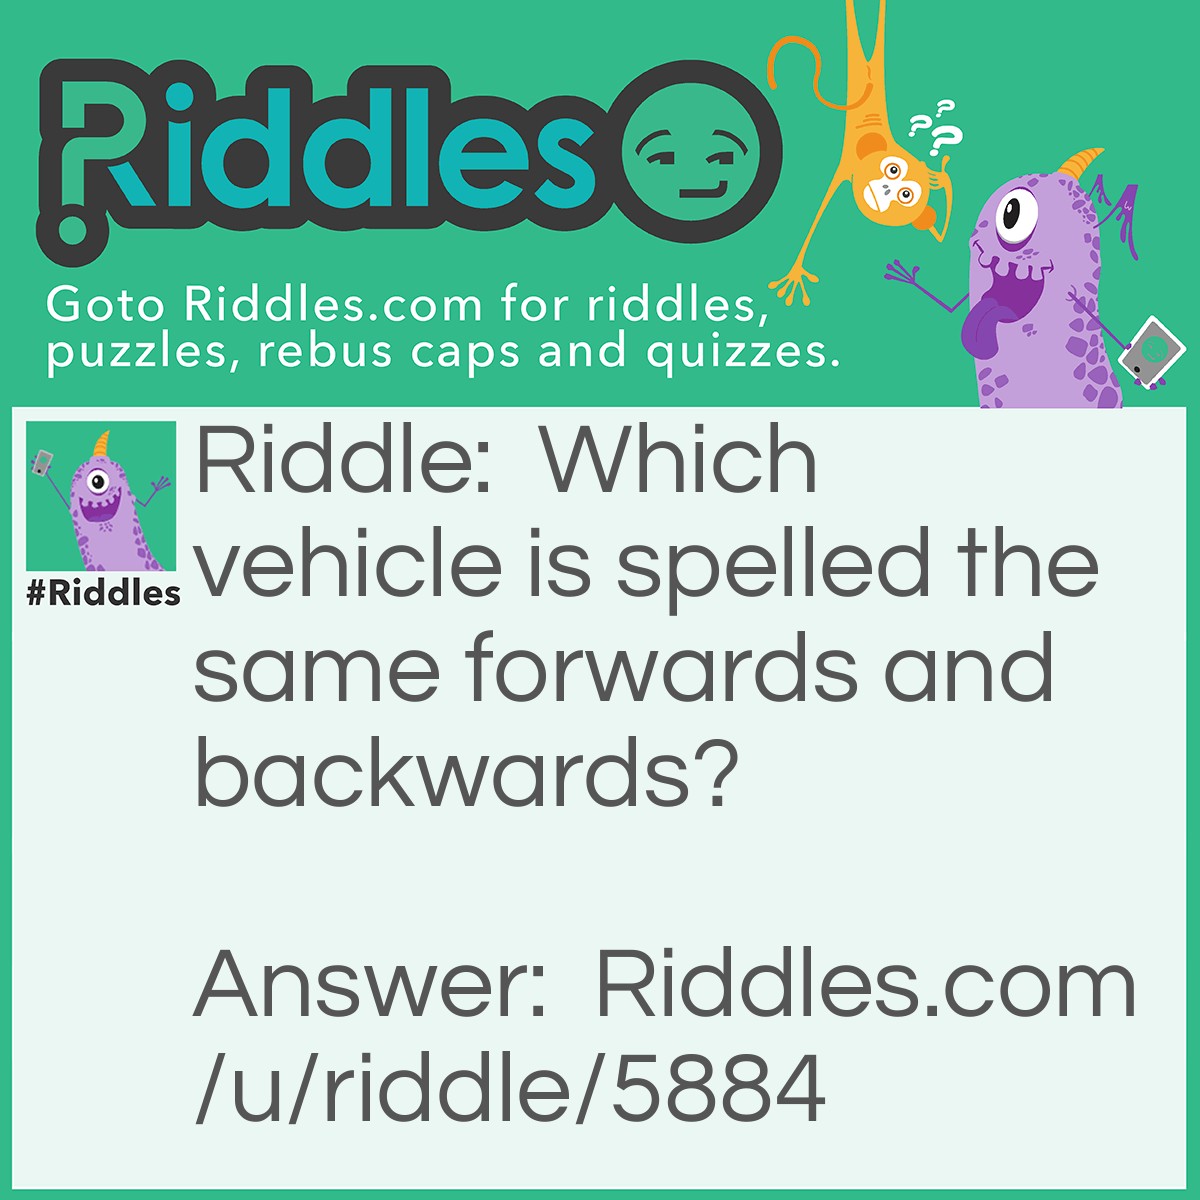 Riddle: Which vehicle is spelled the same forwards and backwards? Answer: Race car.